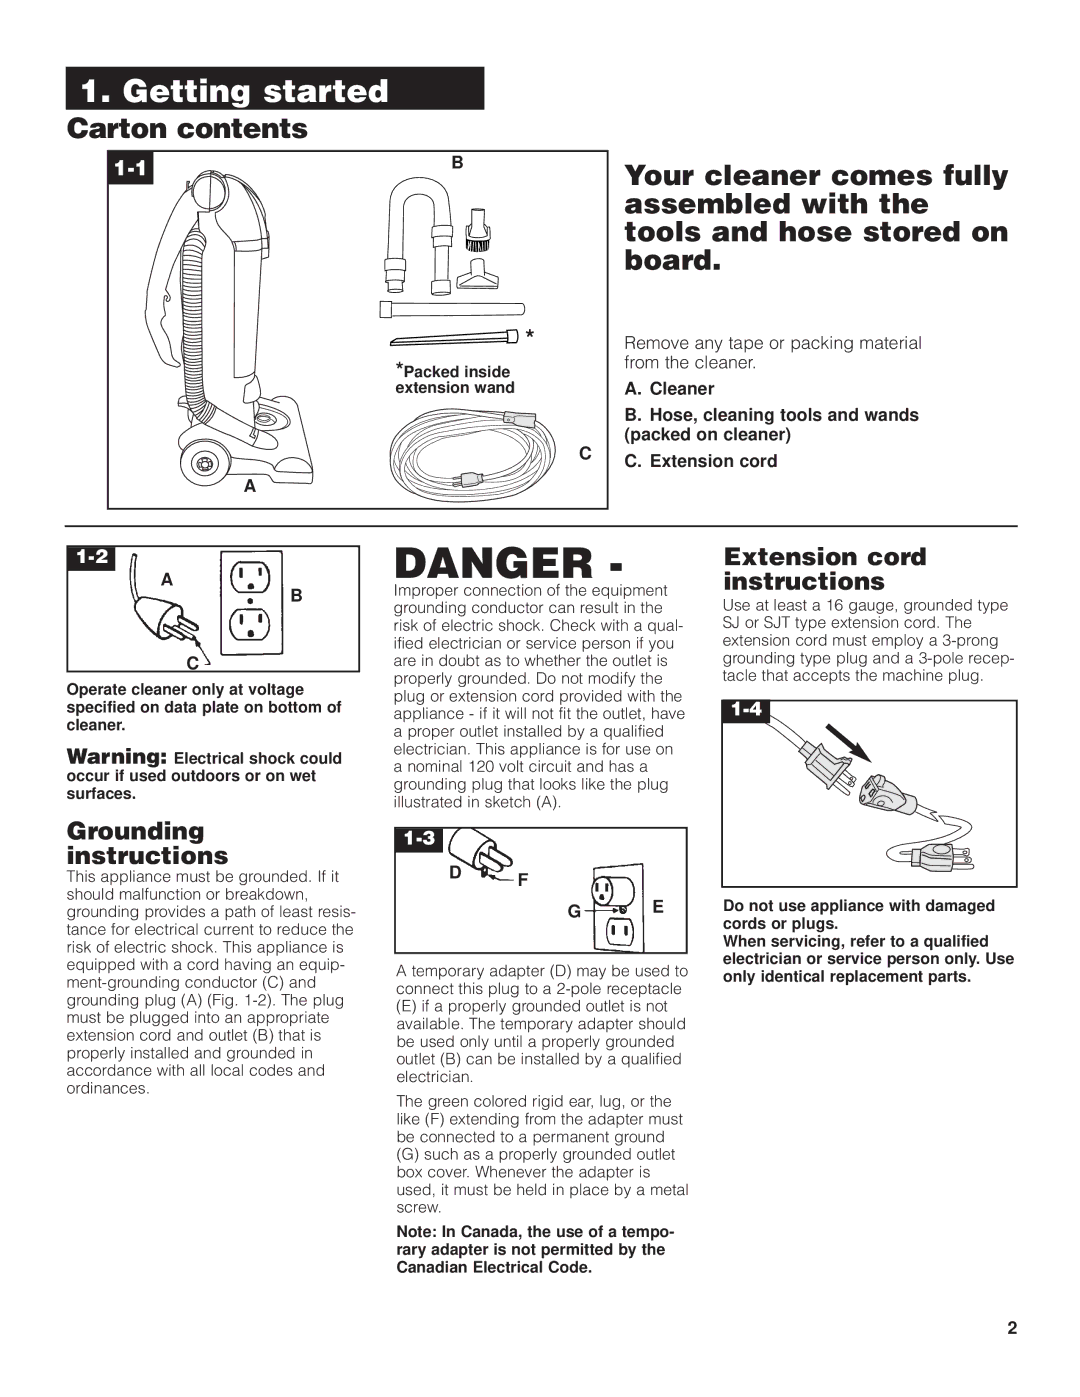 Hoover C1660-900 user manual Grounding instructions, Extension cord instructions, Packed inside extension wand 